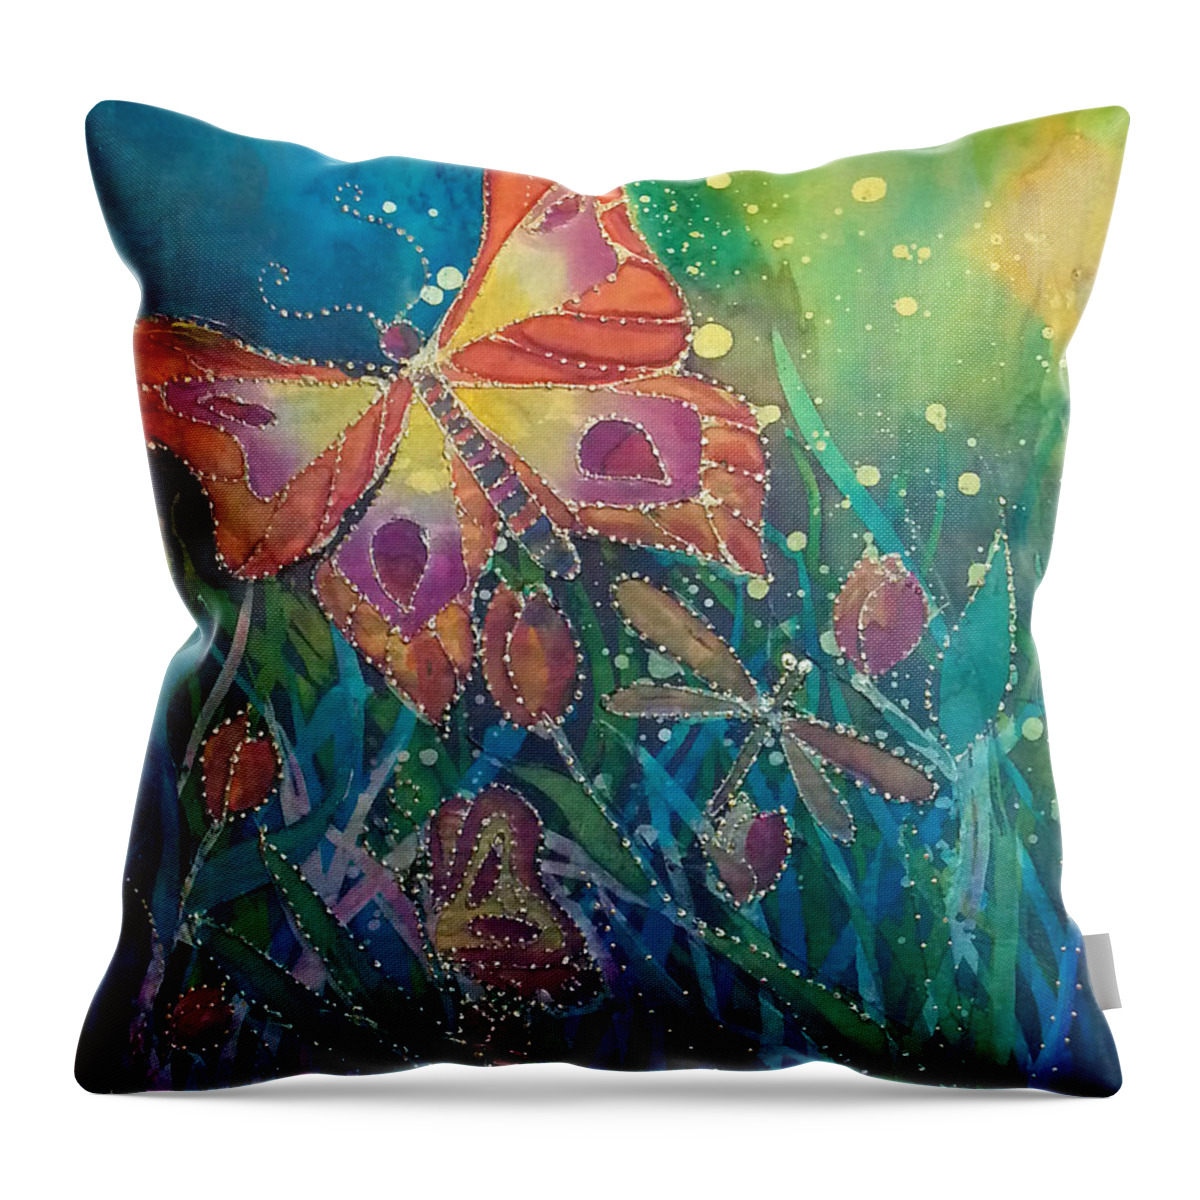 Silk Painting Throw Pillow featuring the painting Jeweled Butterfly Fantasy by Francine Dufour Jones